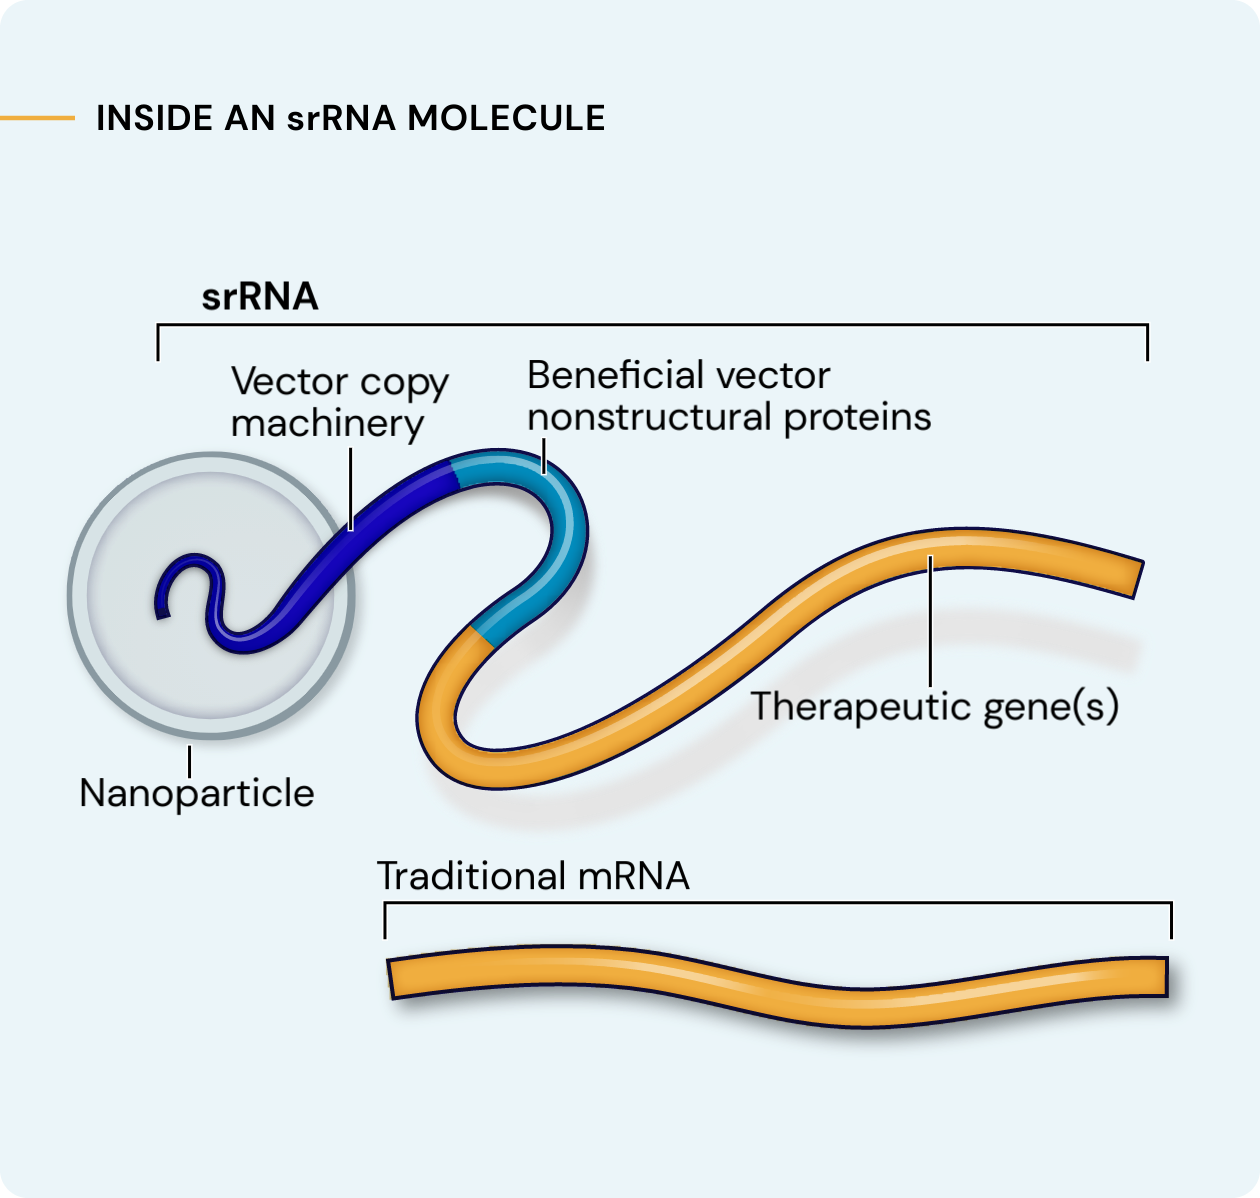 A scientific illustration depicting an srRNA molecule with four color-coded parts. Leftmost is a grey circular nanoparticle. Branching out from this nanoparticle is a long strand of RNA with three segments. First is the dark blue vector copy machinery. Next is the teal beneficial vector nonstructural proteins. Last is the yellow therapeutic gene(s). A short piece of yellow traditional mRNA is shown for comparison.